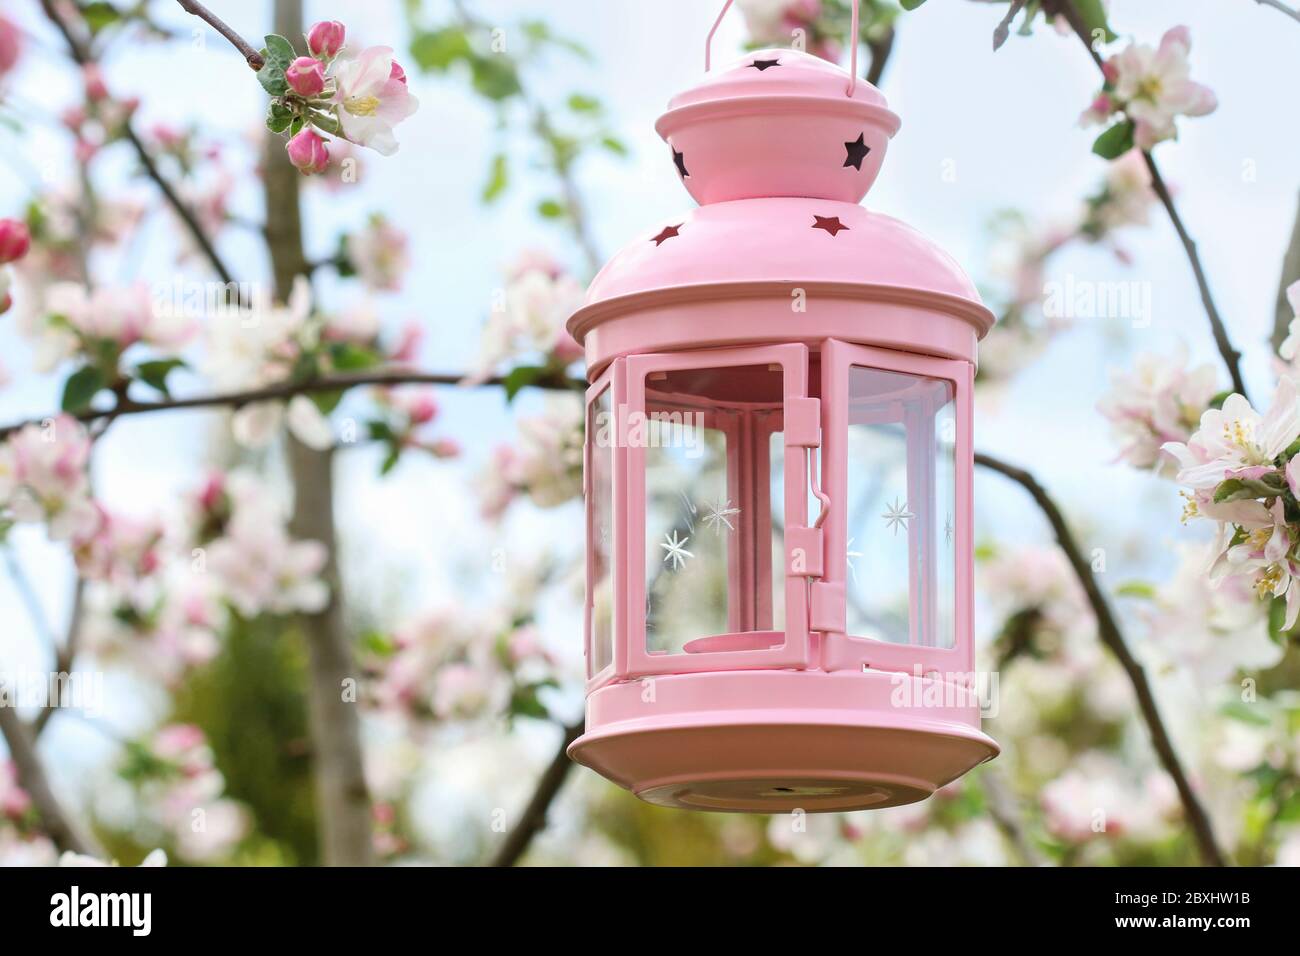 Beautiful pink lantern is hanging on a blooming apple tree branch in the garden. Outdoor party decoration. Stock Photo